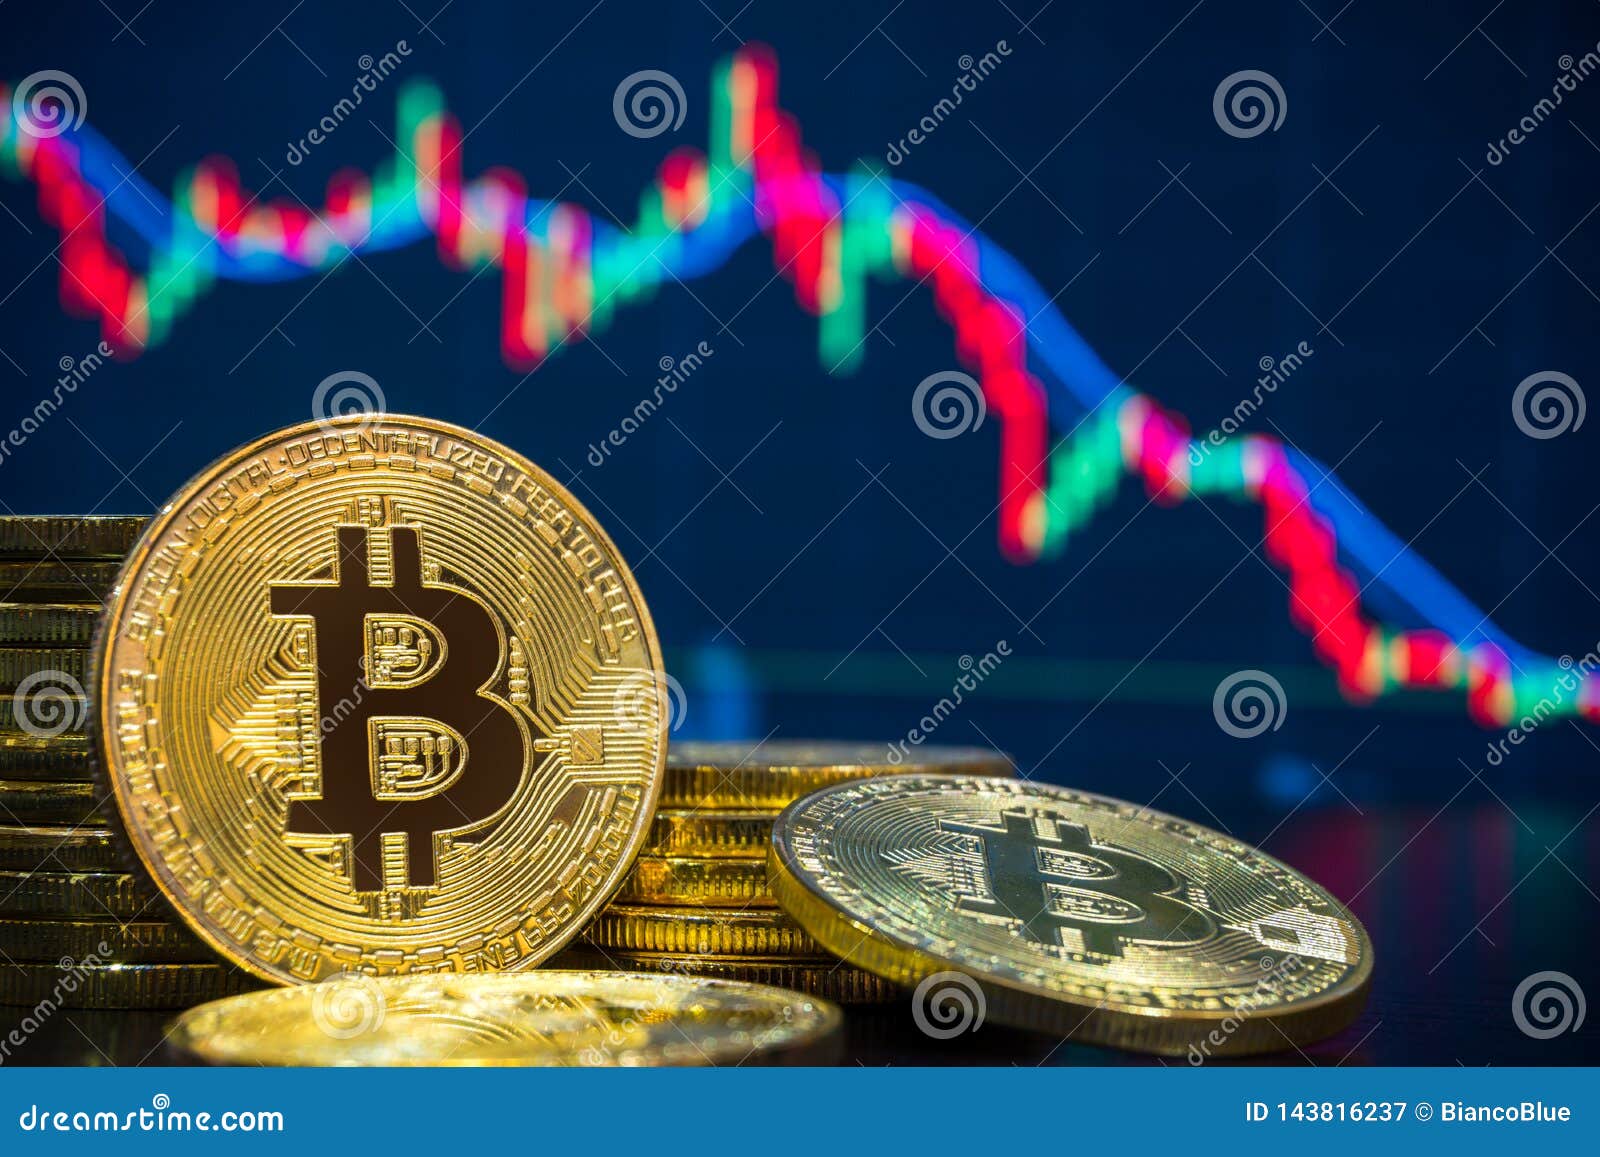 cryptocurrency exchanges trading bitcoins